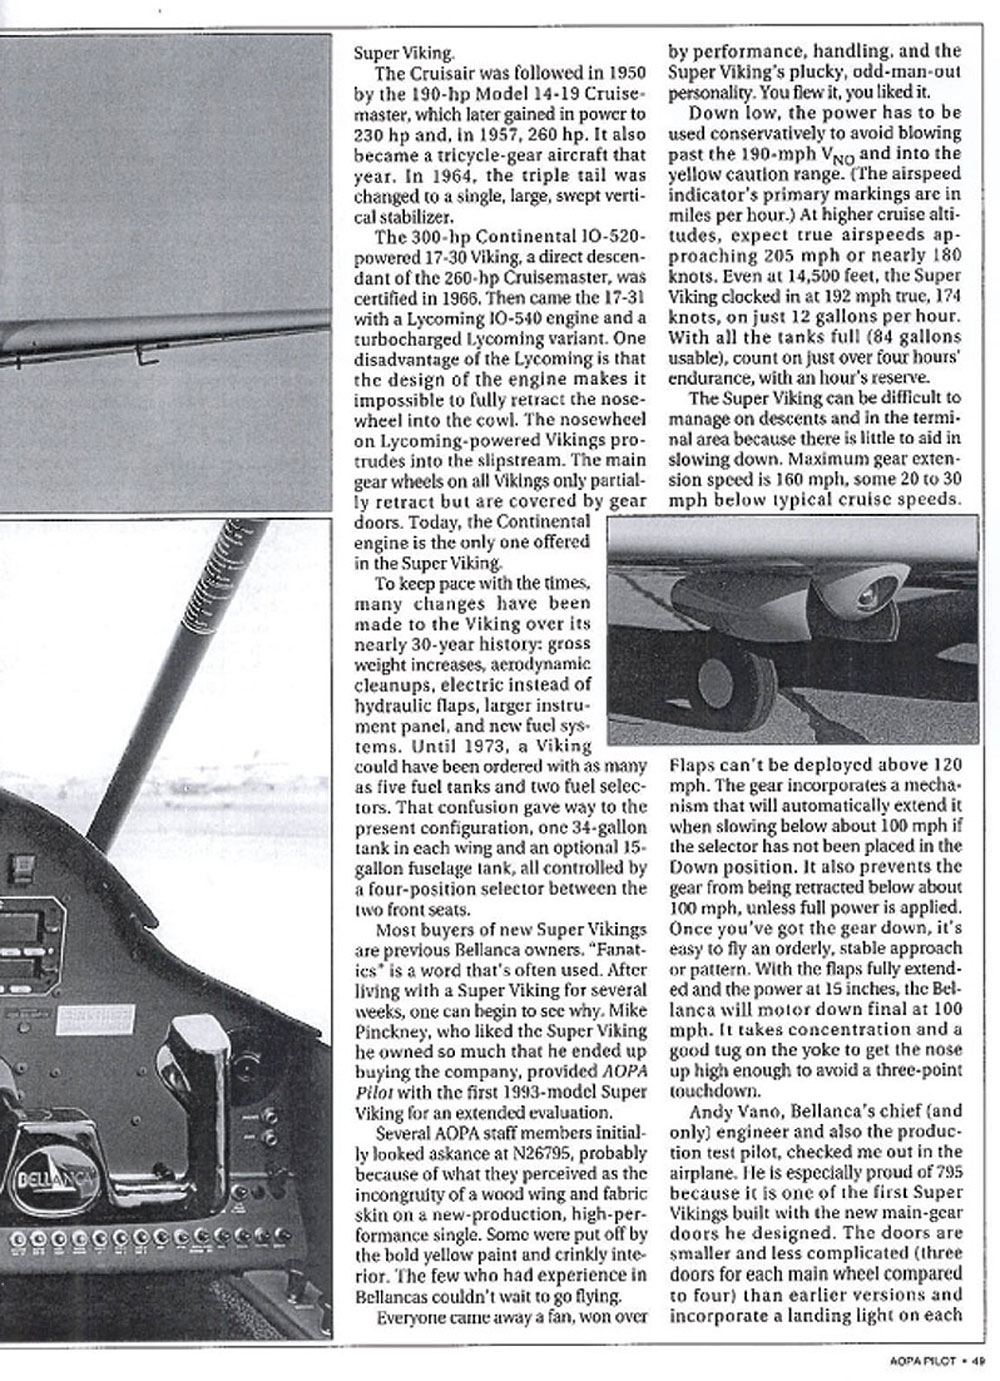 AOPA Article Page 4